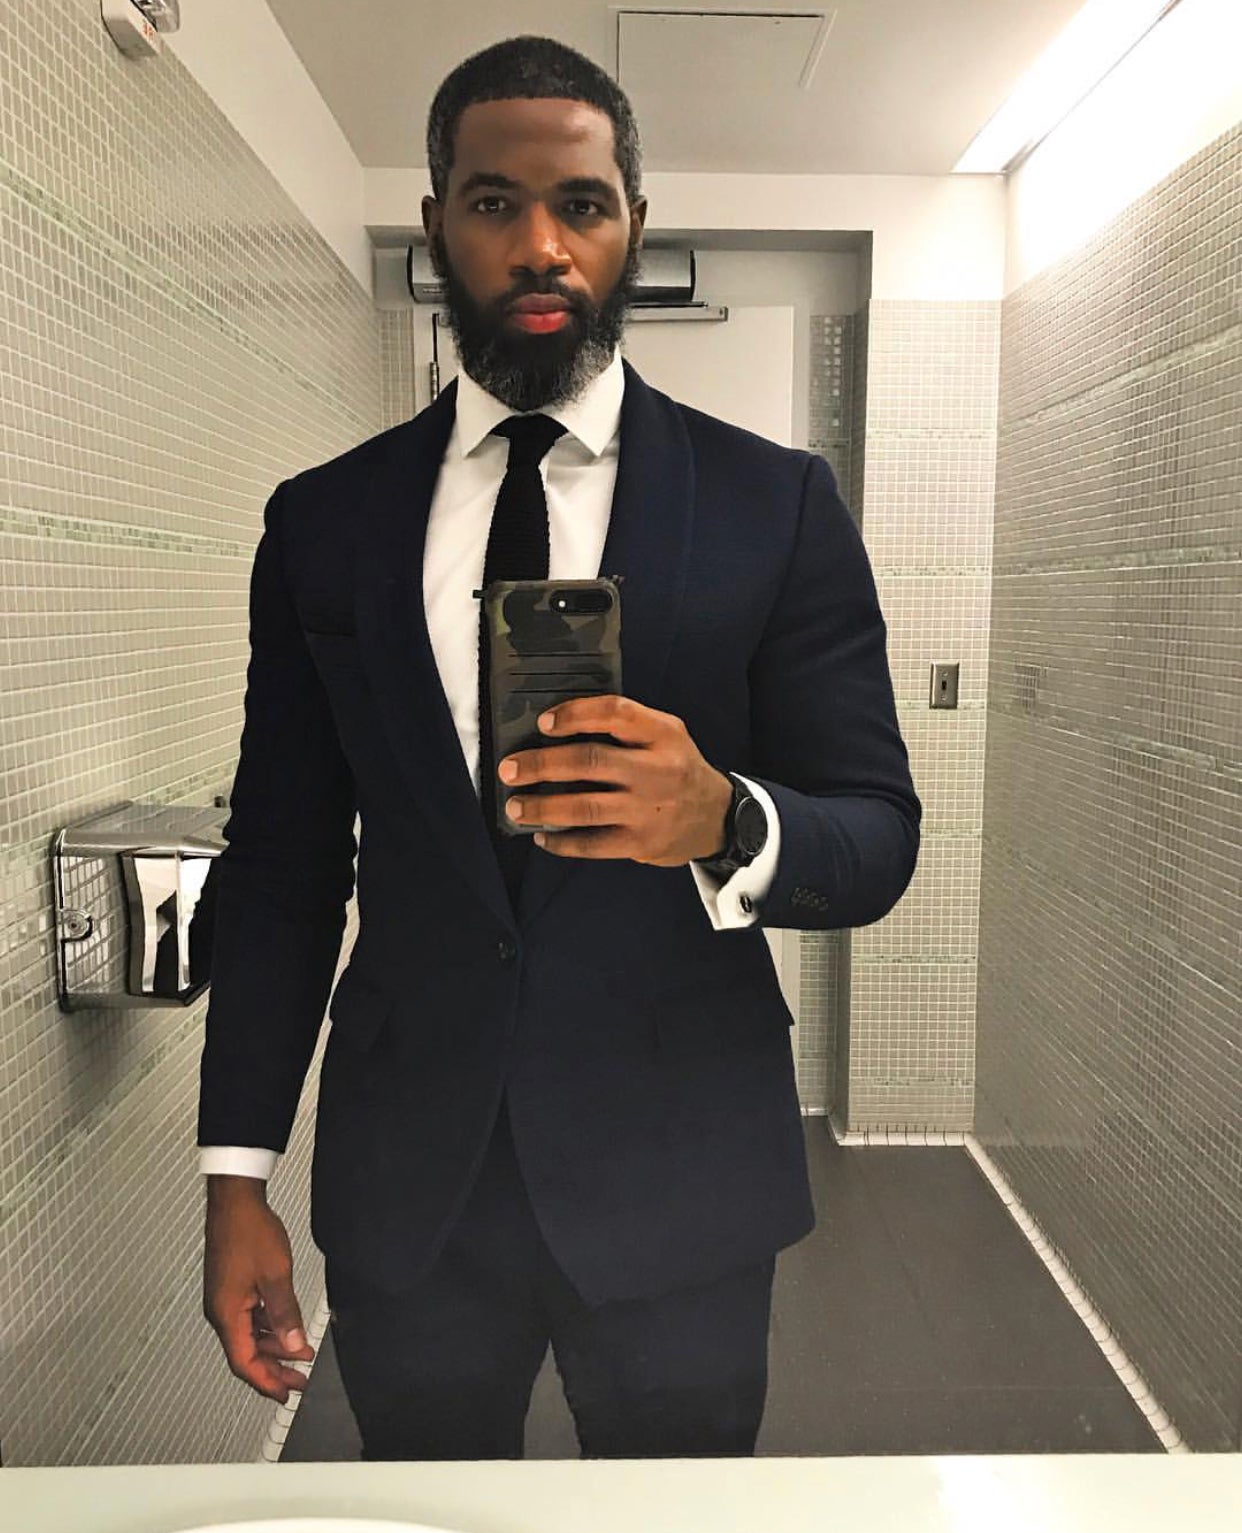 Zaddy Alert! 18 Fine Men On Instagram Who Want To Be Your #MCM
